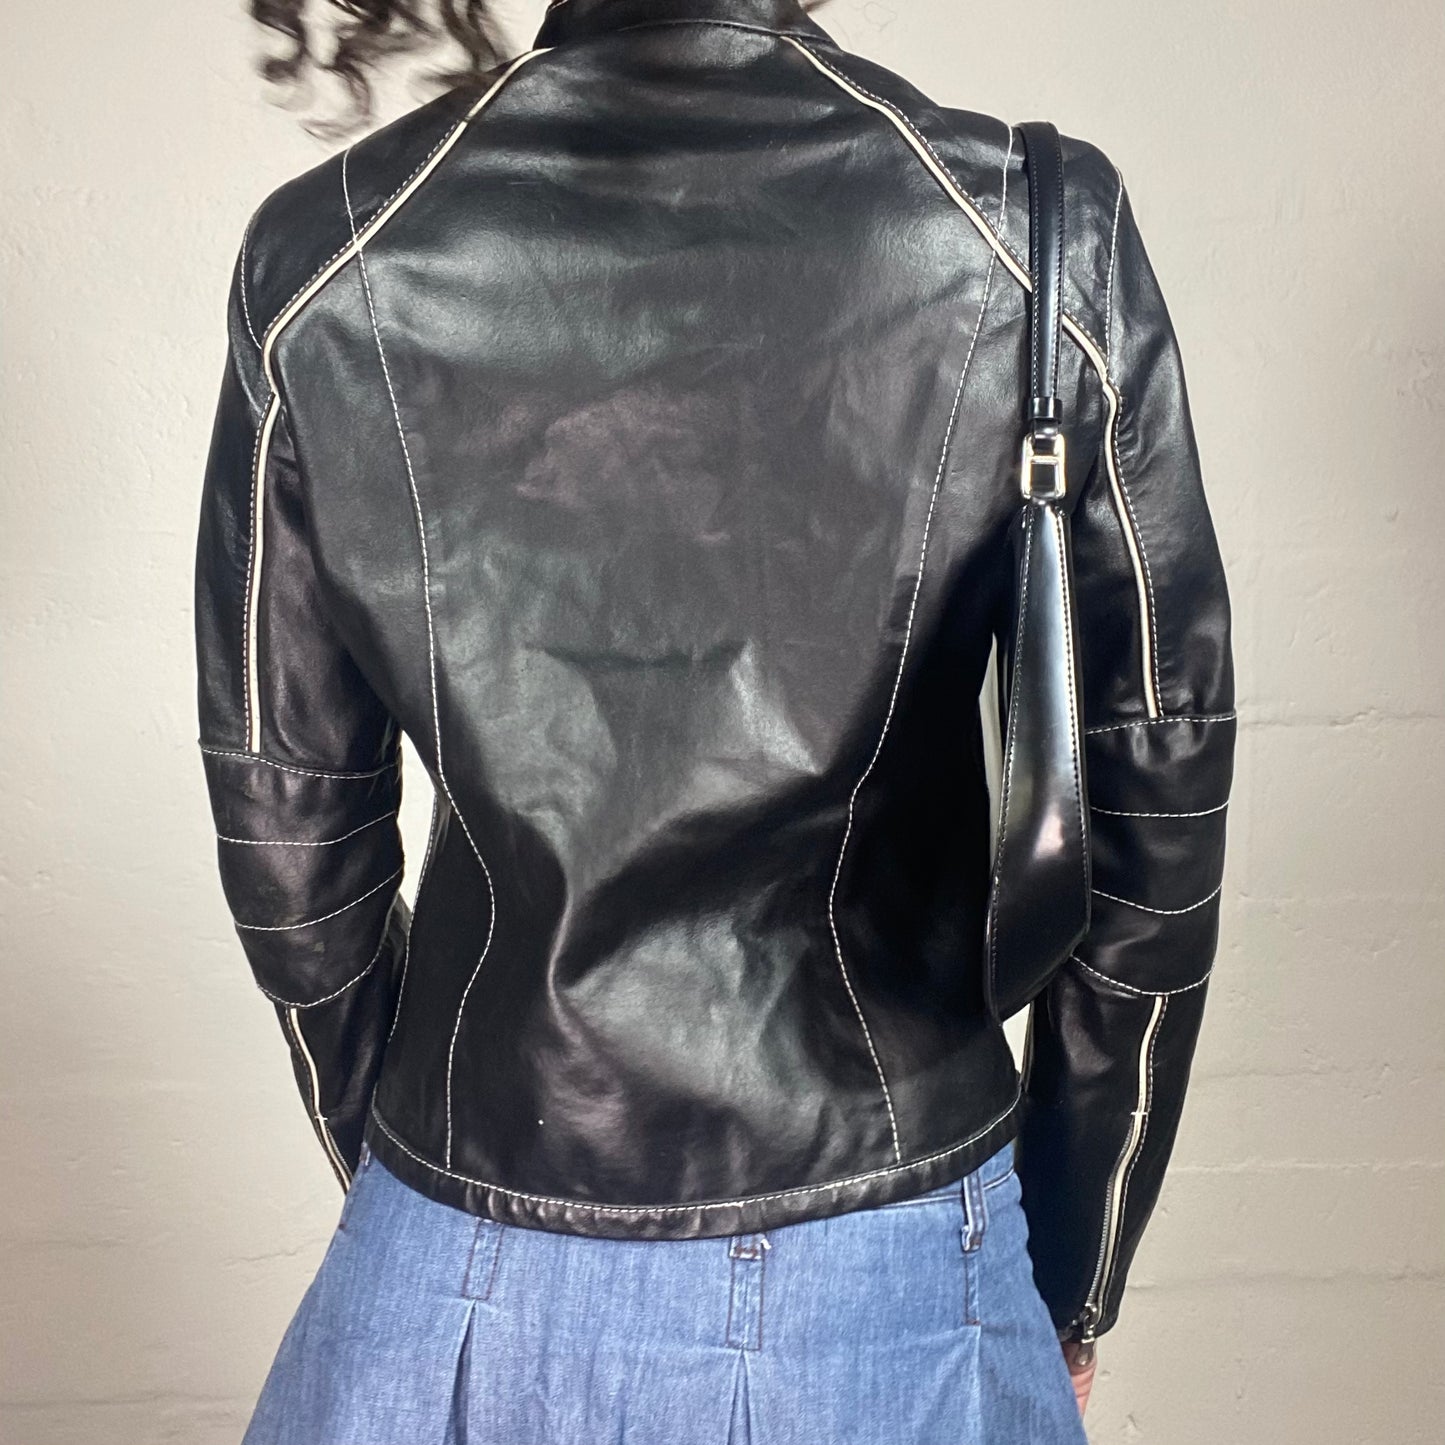 Vintage 2000's Biker Glossy Black Leather Jacket with Contrast White Stripes (M)